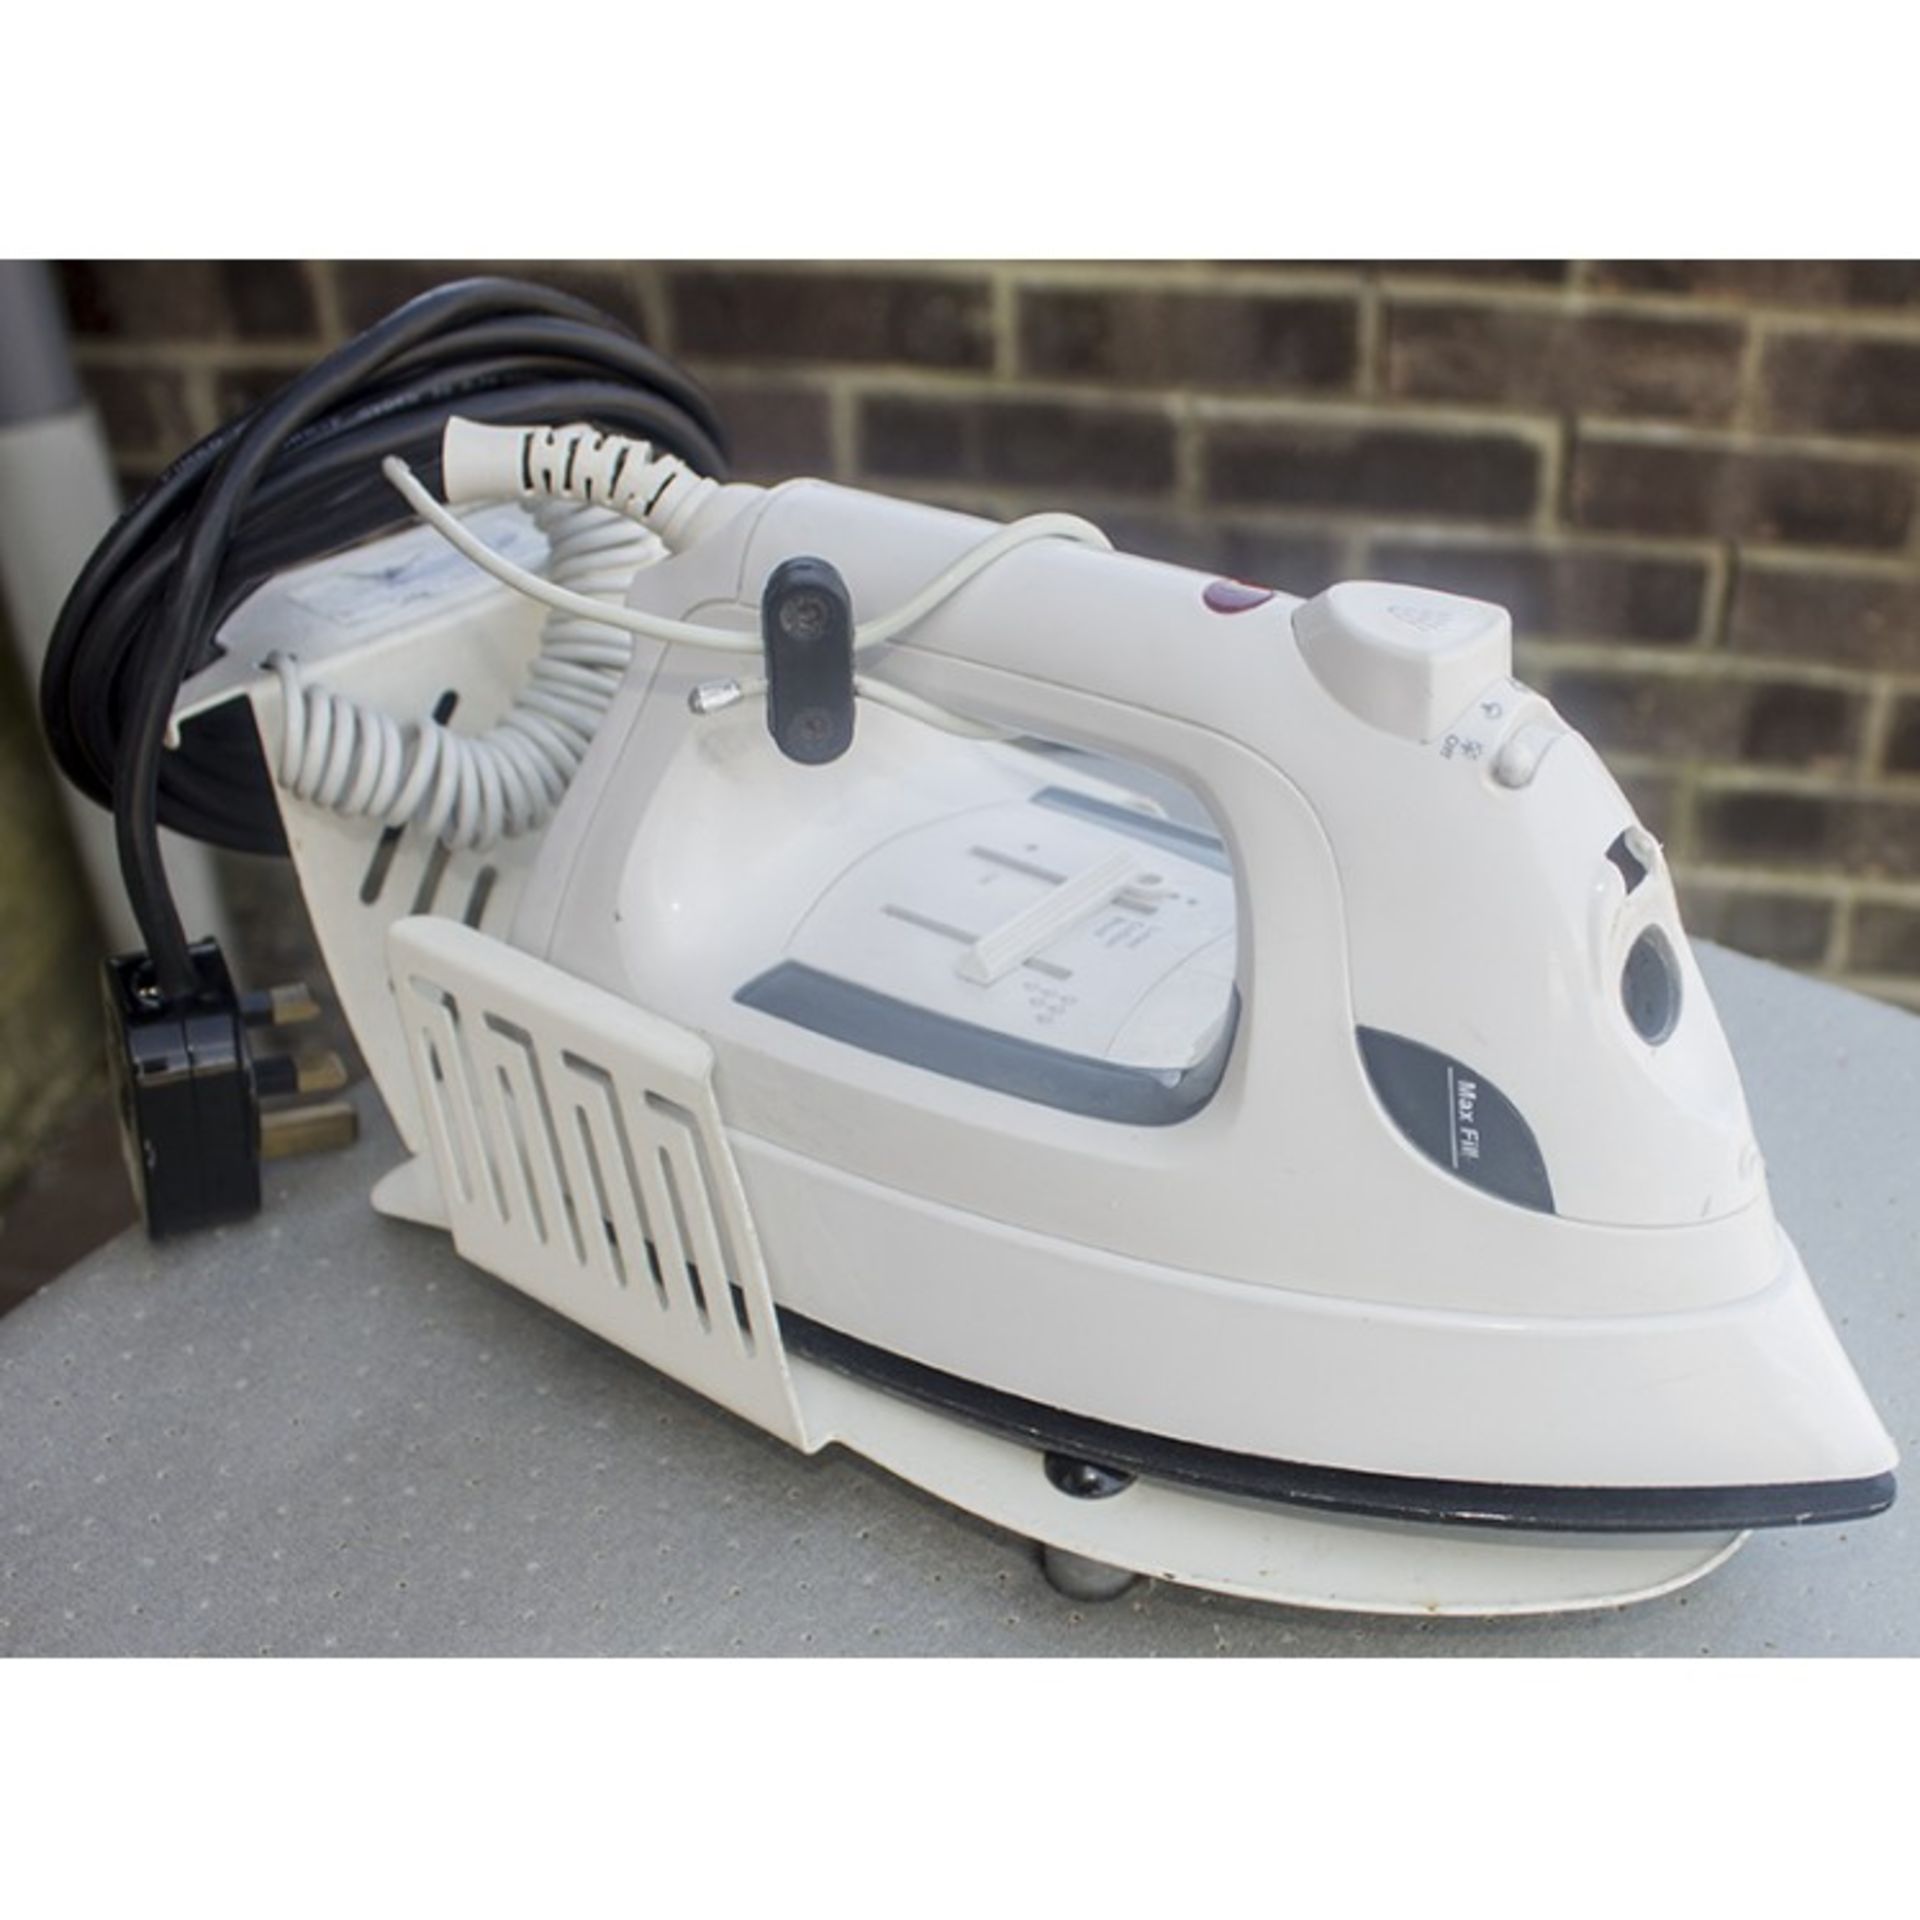 100 x  Iron Board With Iron

Ex Hotel Iron with ironing board, Prevents Iron Burn Damage and Iron - Image 2 of 4